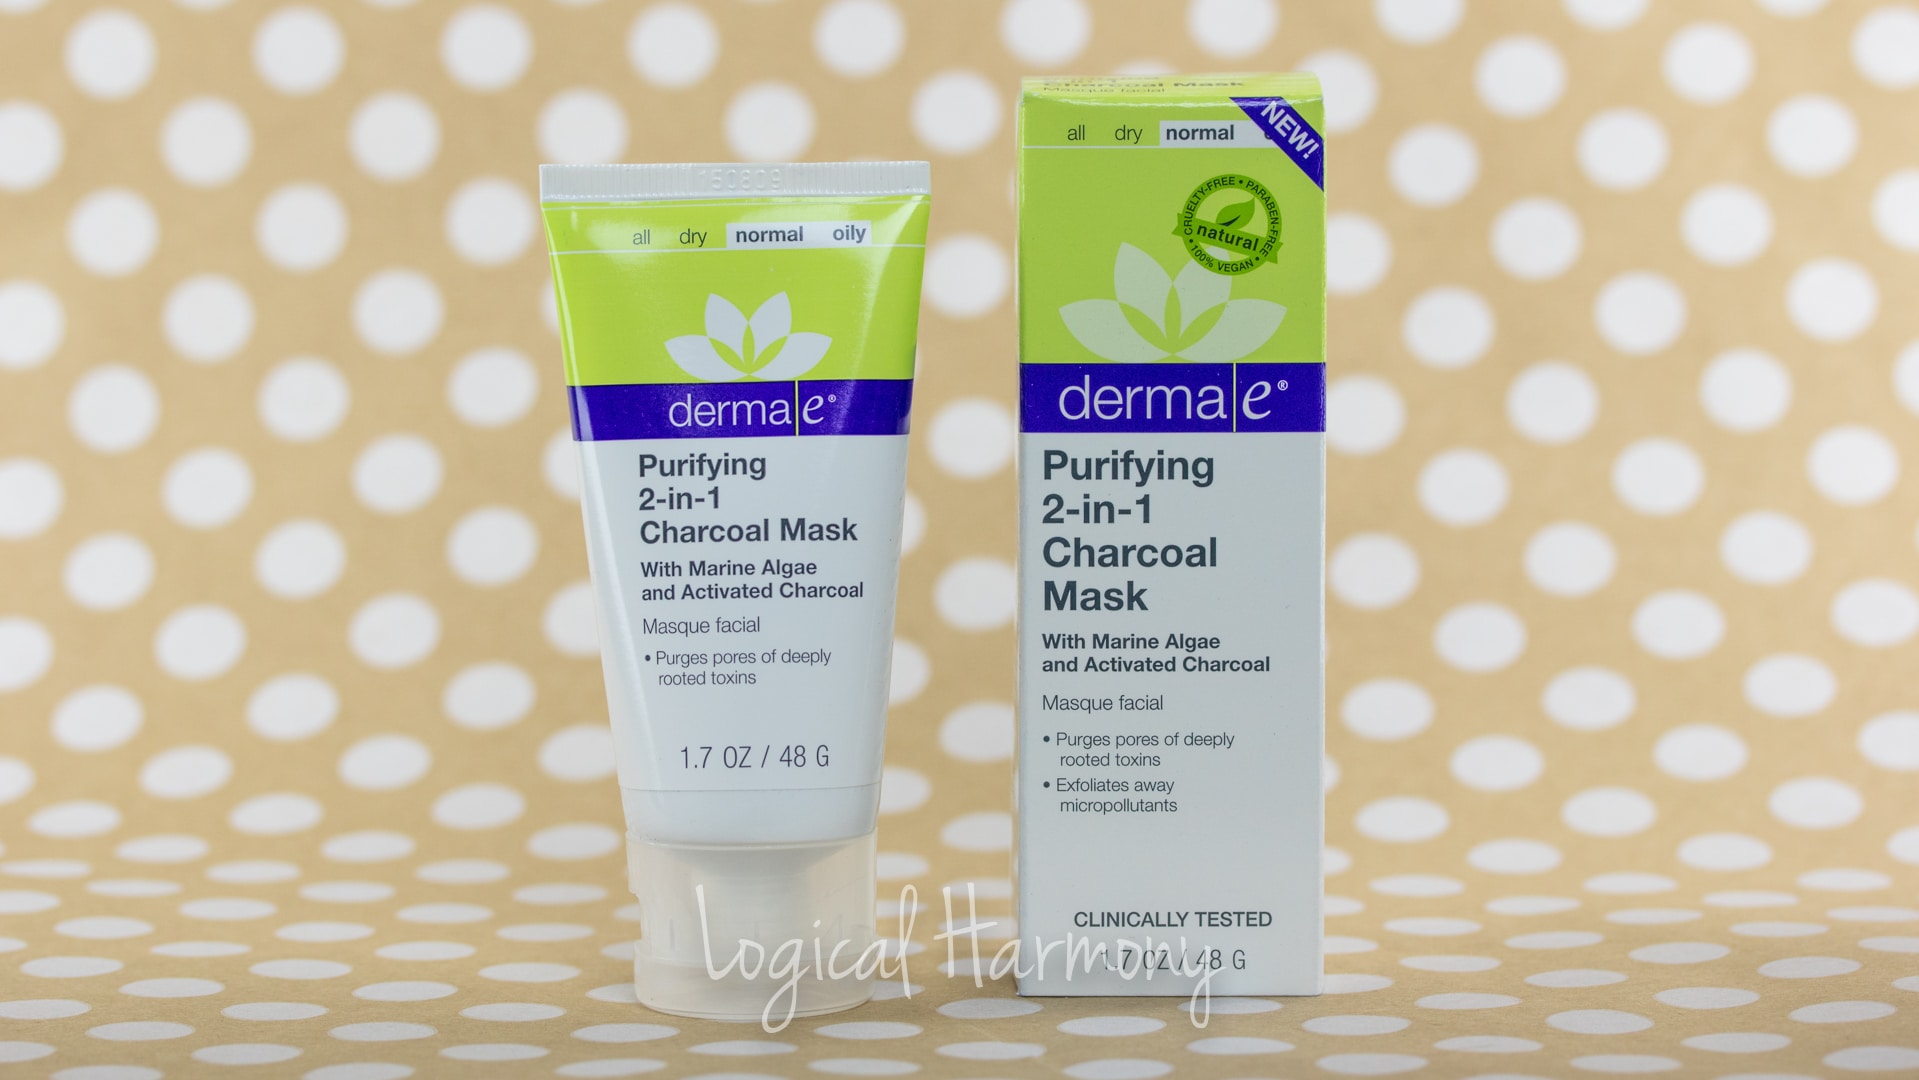 Derma E Purifying 2-in-1 Charcoal Mask Review